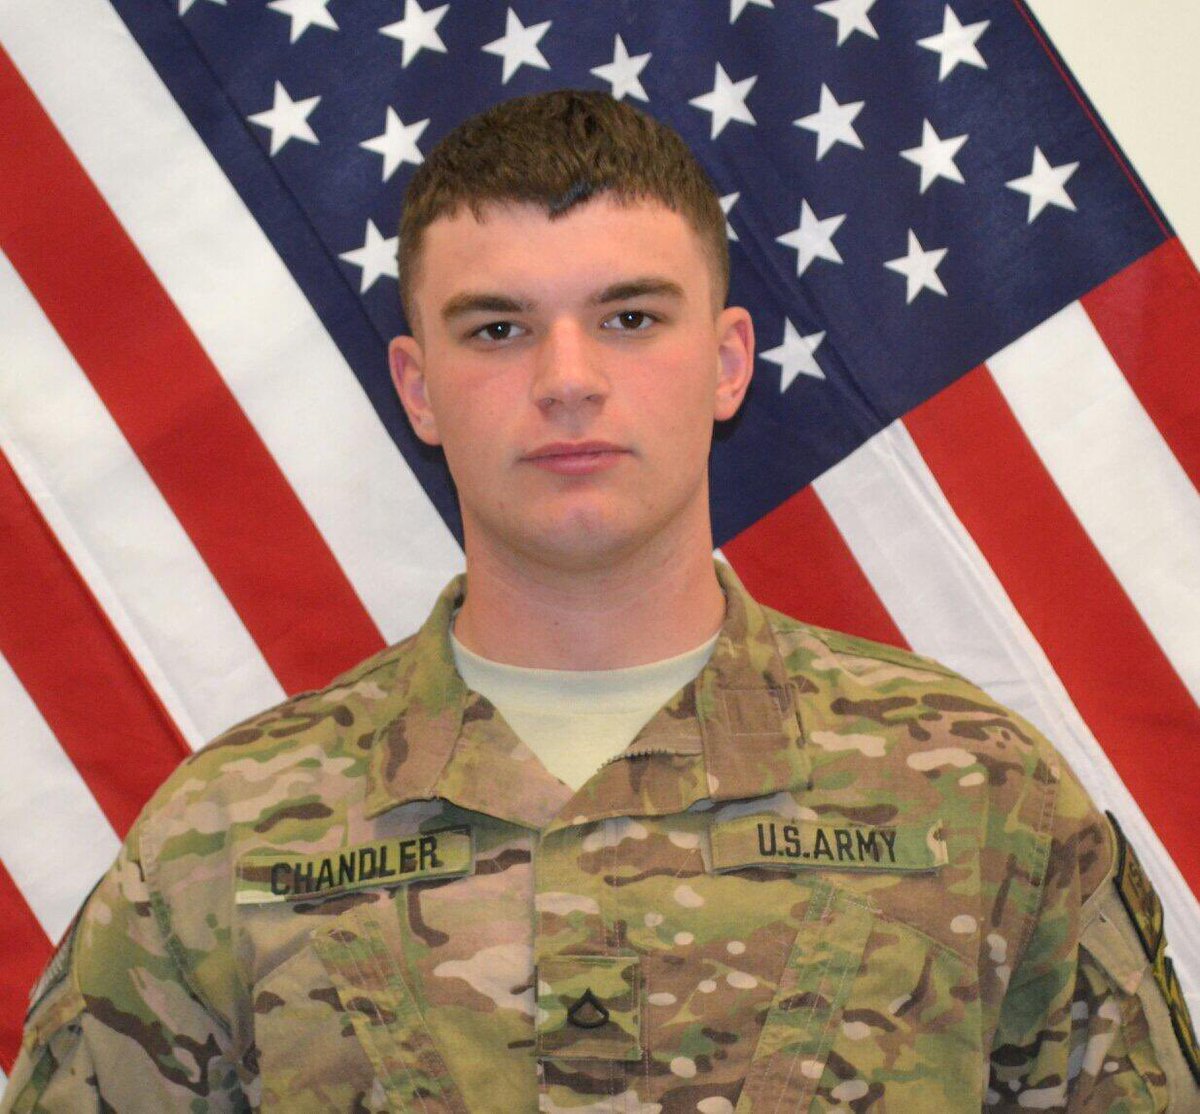 Please help me honor PFC Christian J. Chandler, 20. Killed in Logar, Afghanistan April 28, 2014. A grateful nation will never forget you.